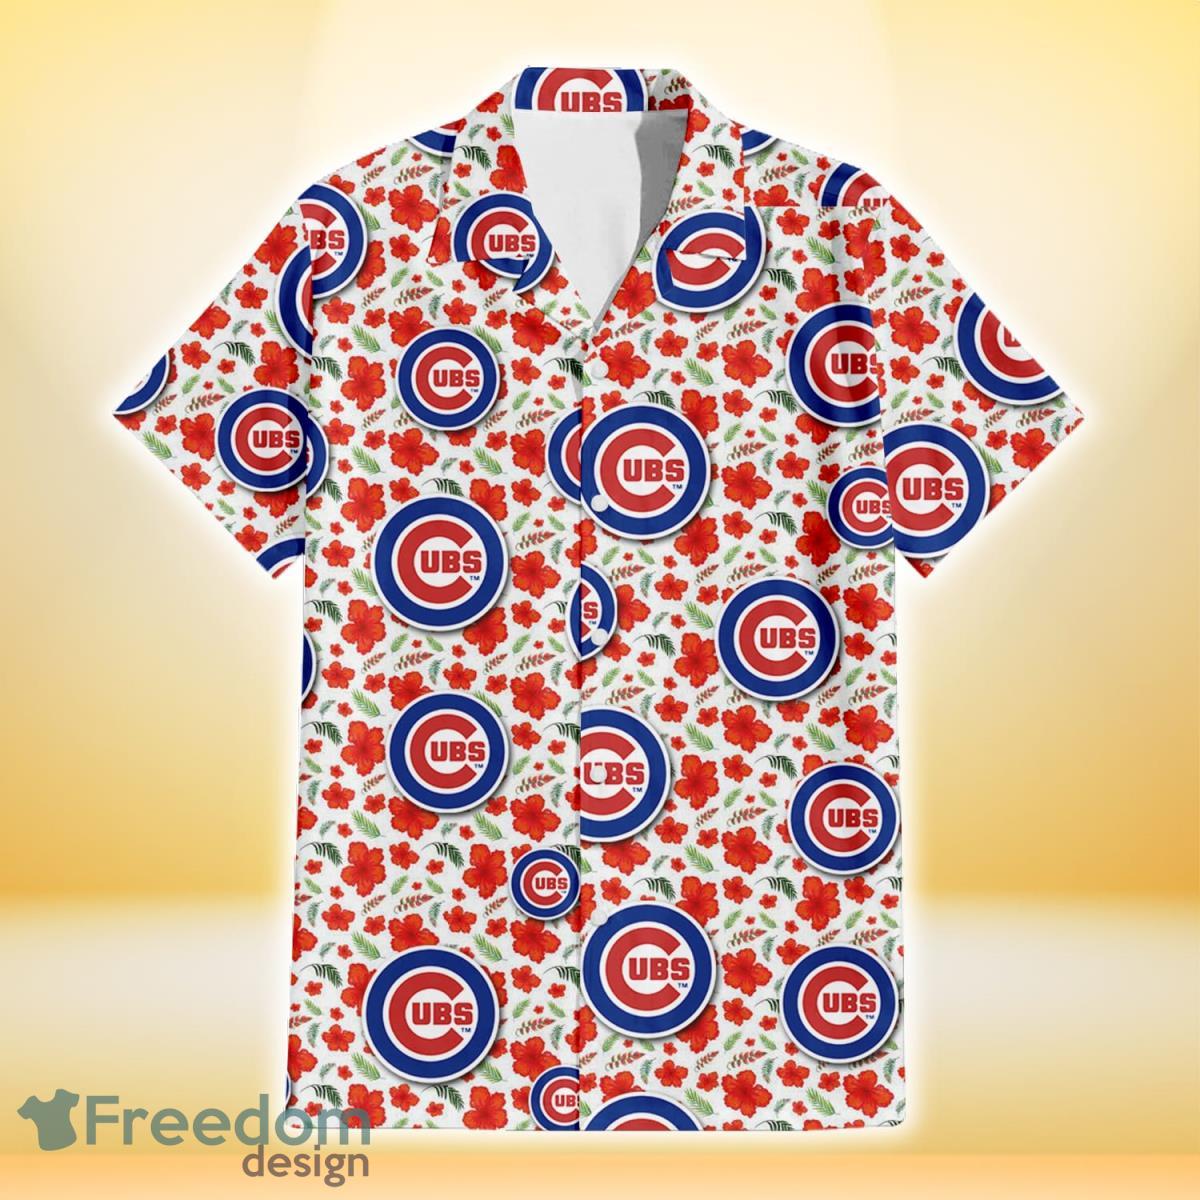 Chicago Cubs Logo And Green Leaf Pattern All Over Print Hawaiian Shirt For  Fans - Freedomdesign